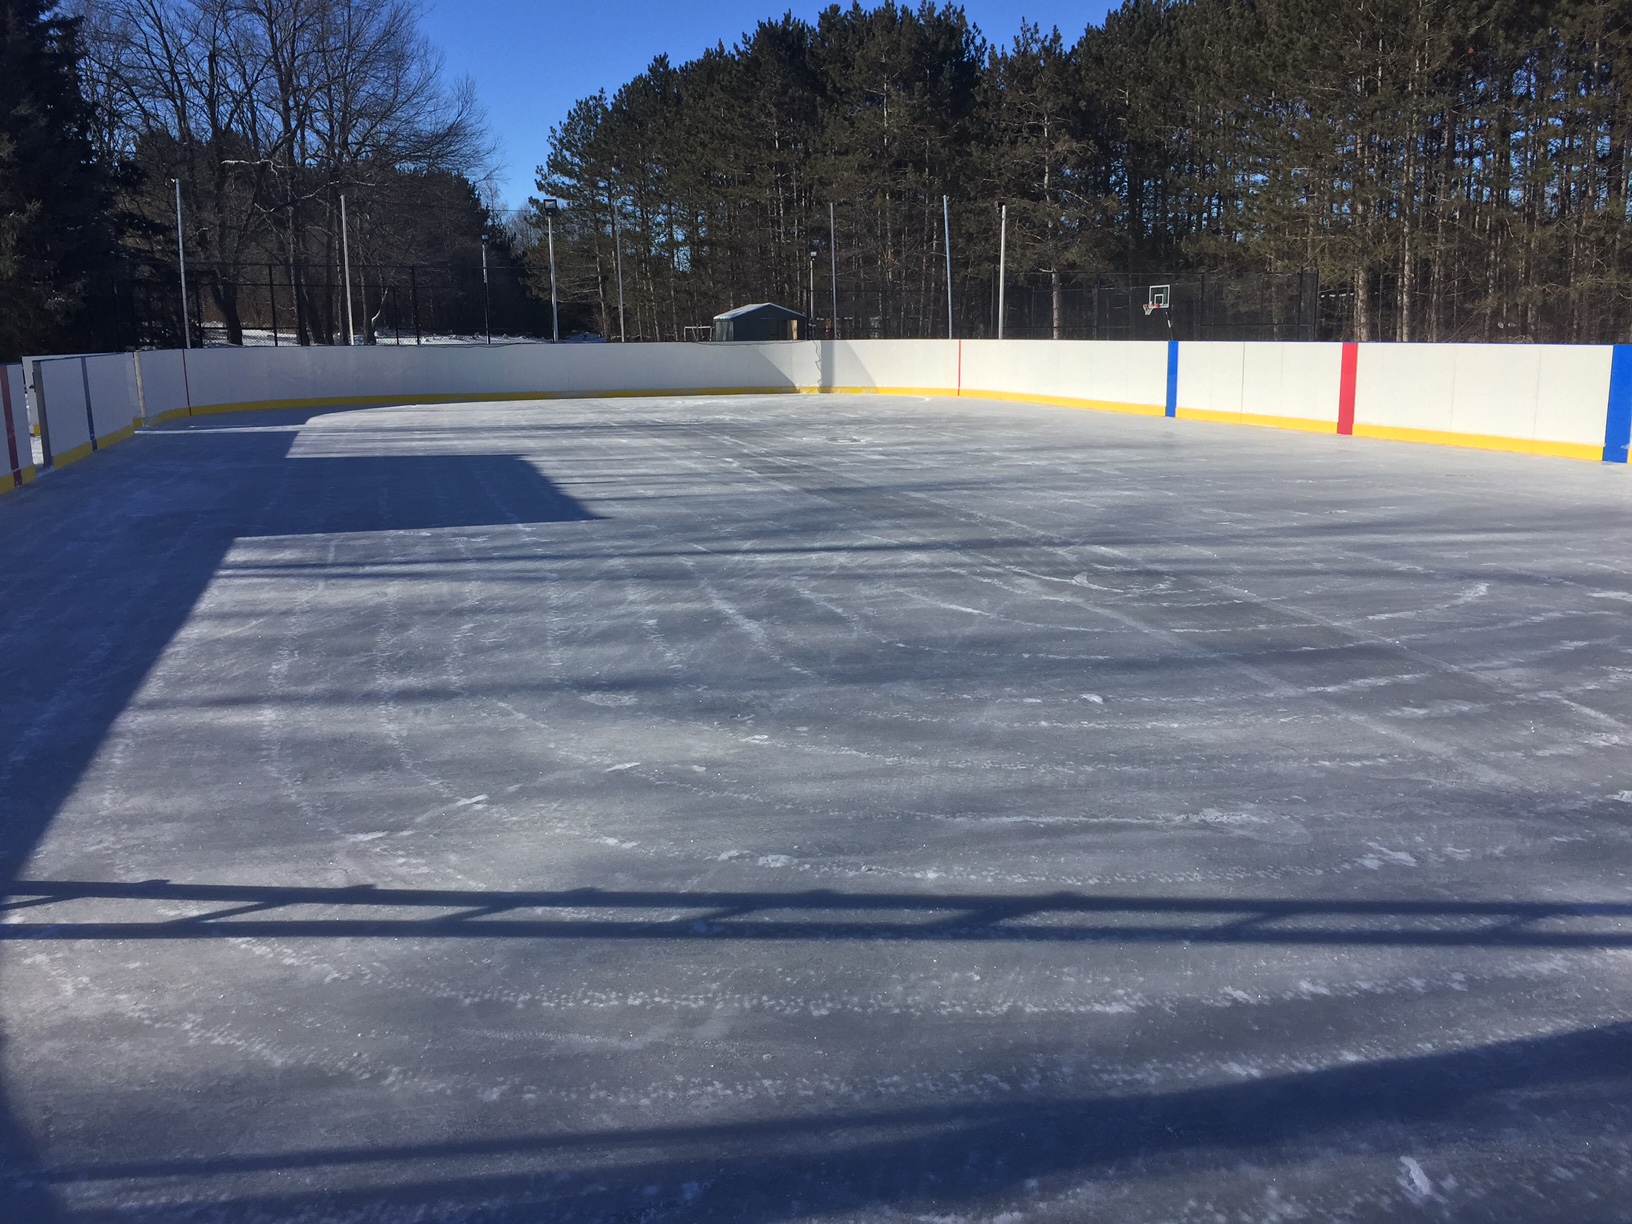 Refrigerated rink with aluminum framed boards